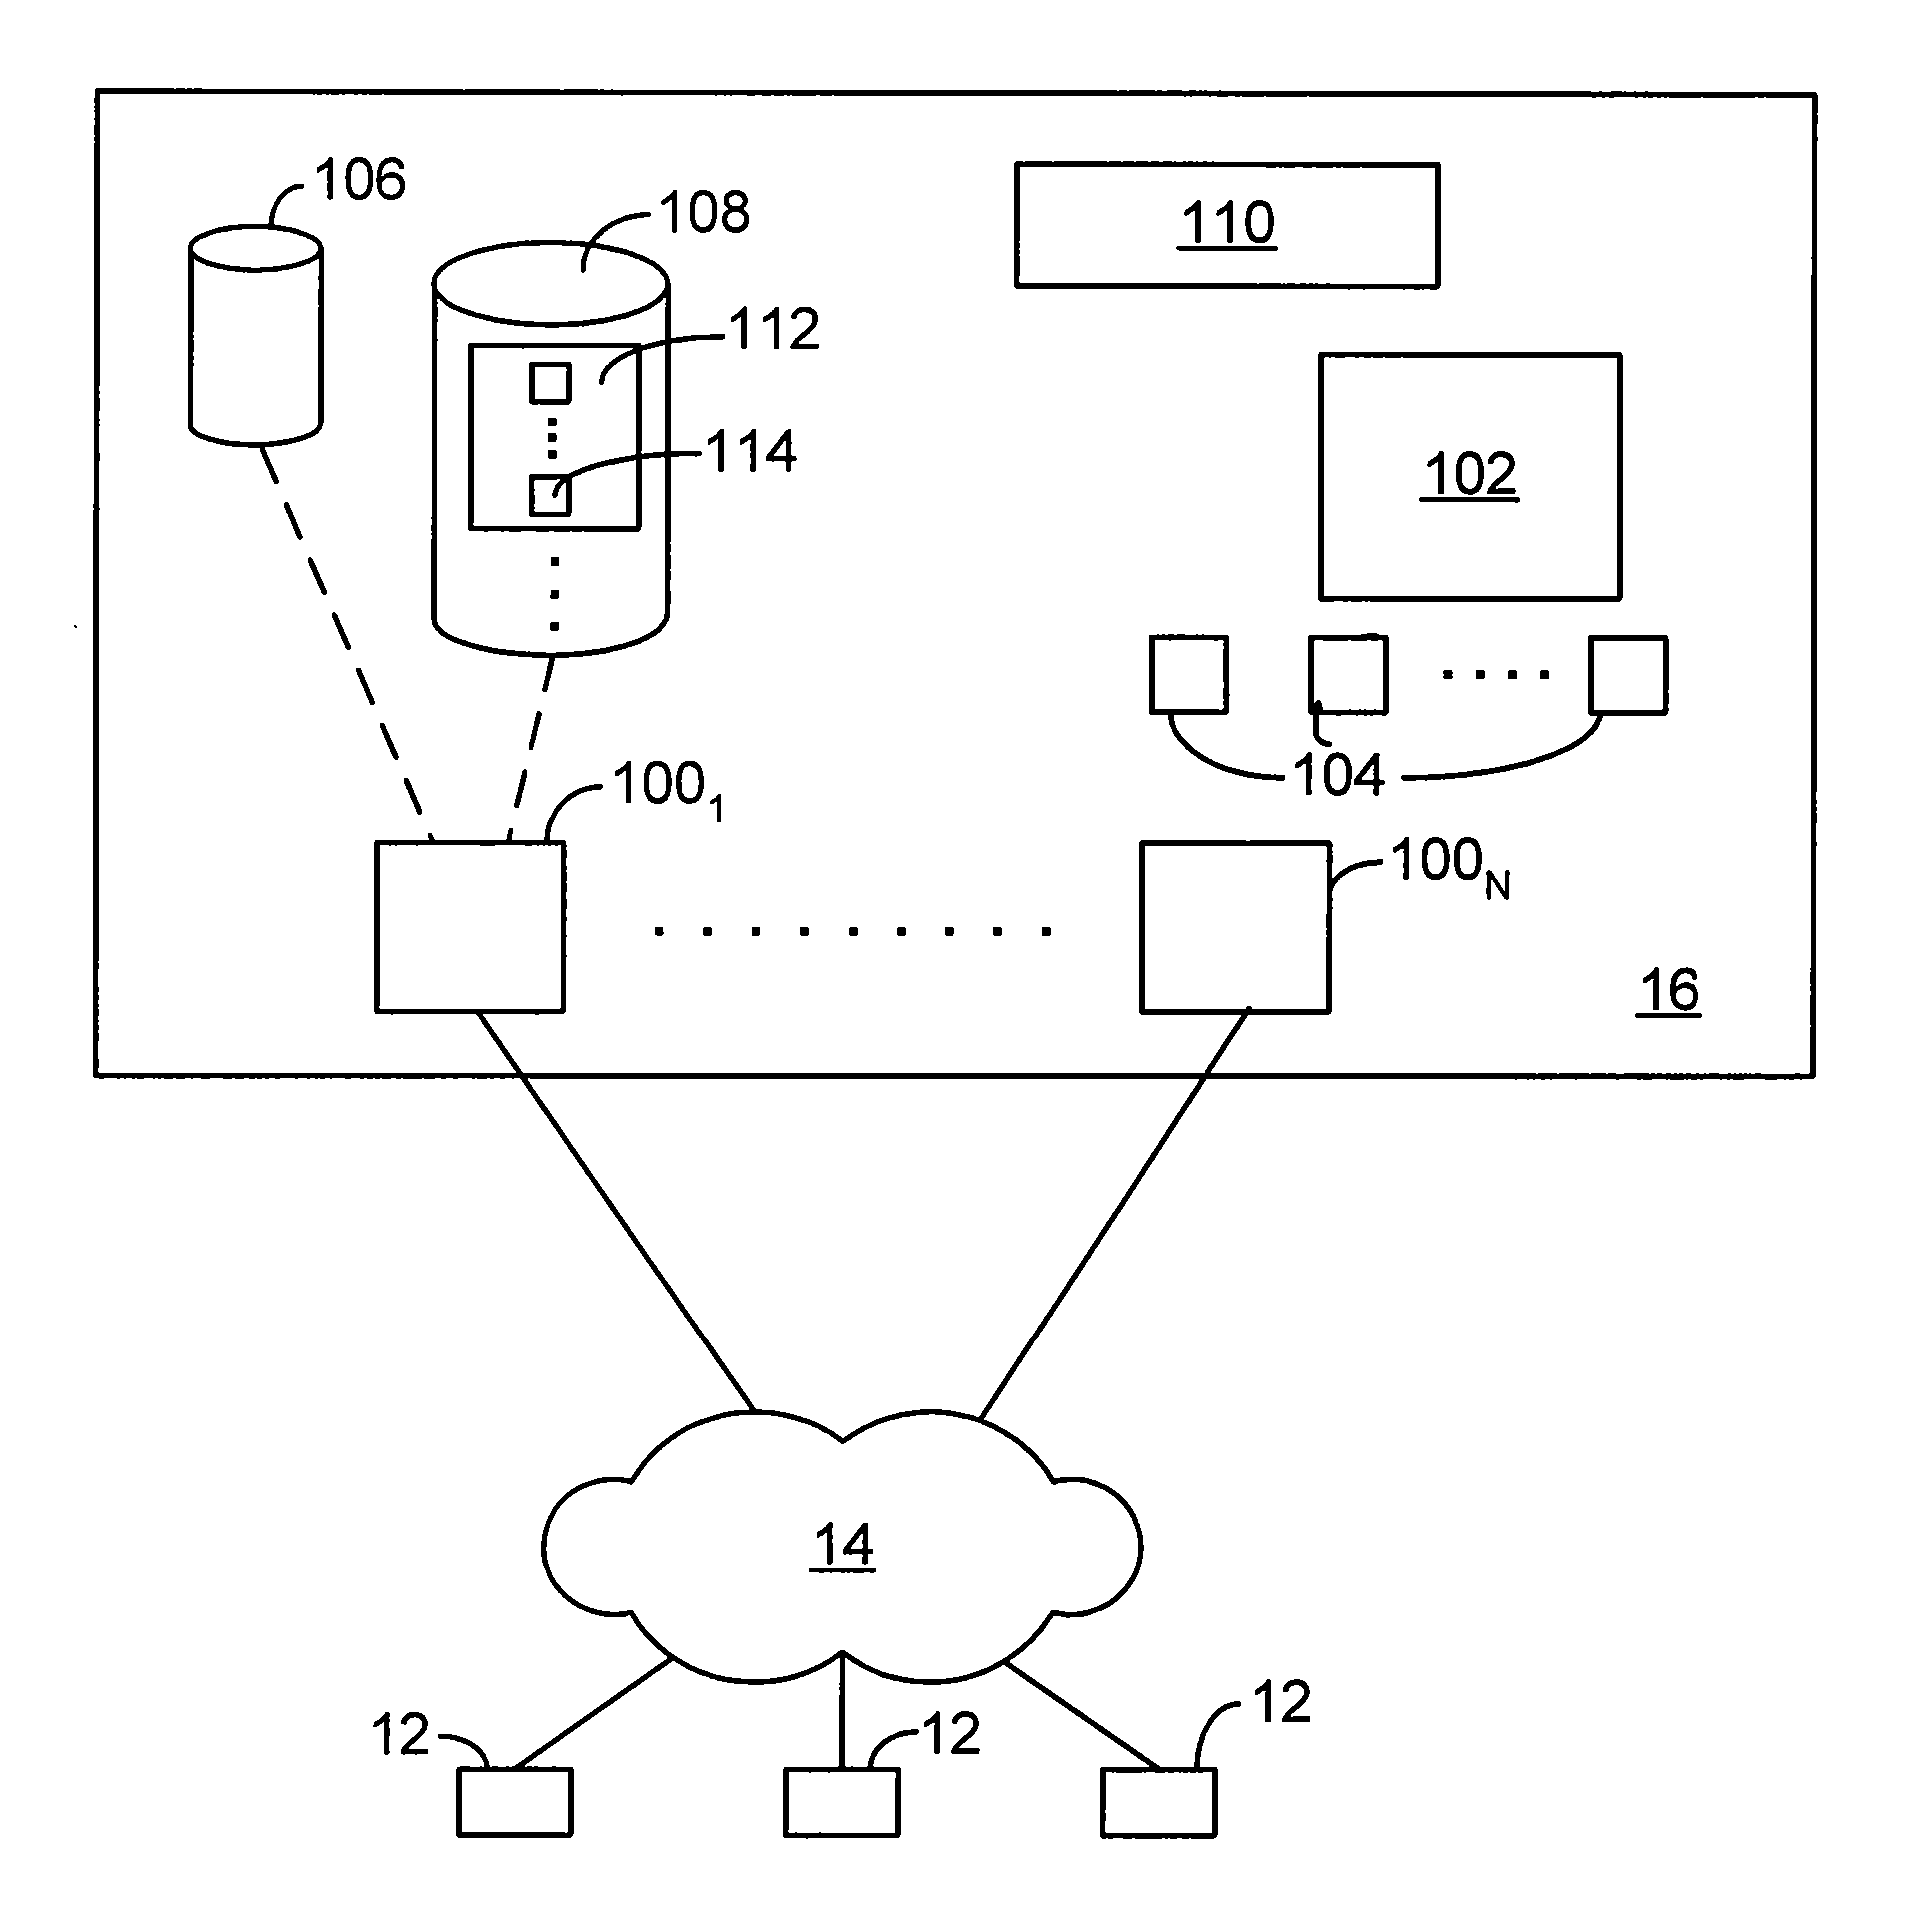 Systems and methods for exporting, publishing, browsing and installing on-demand applications in a multi-tenant database environment